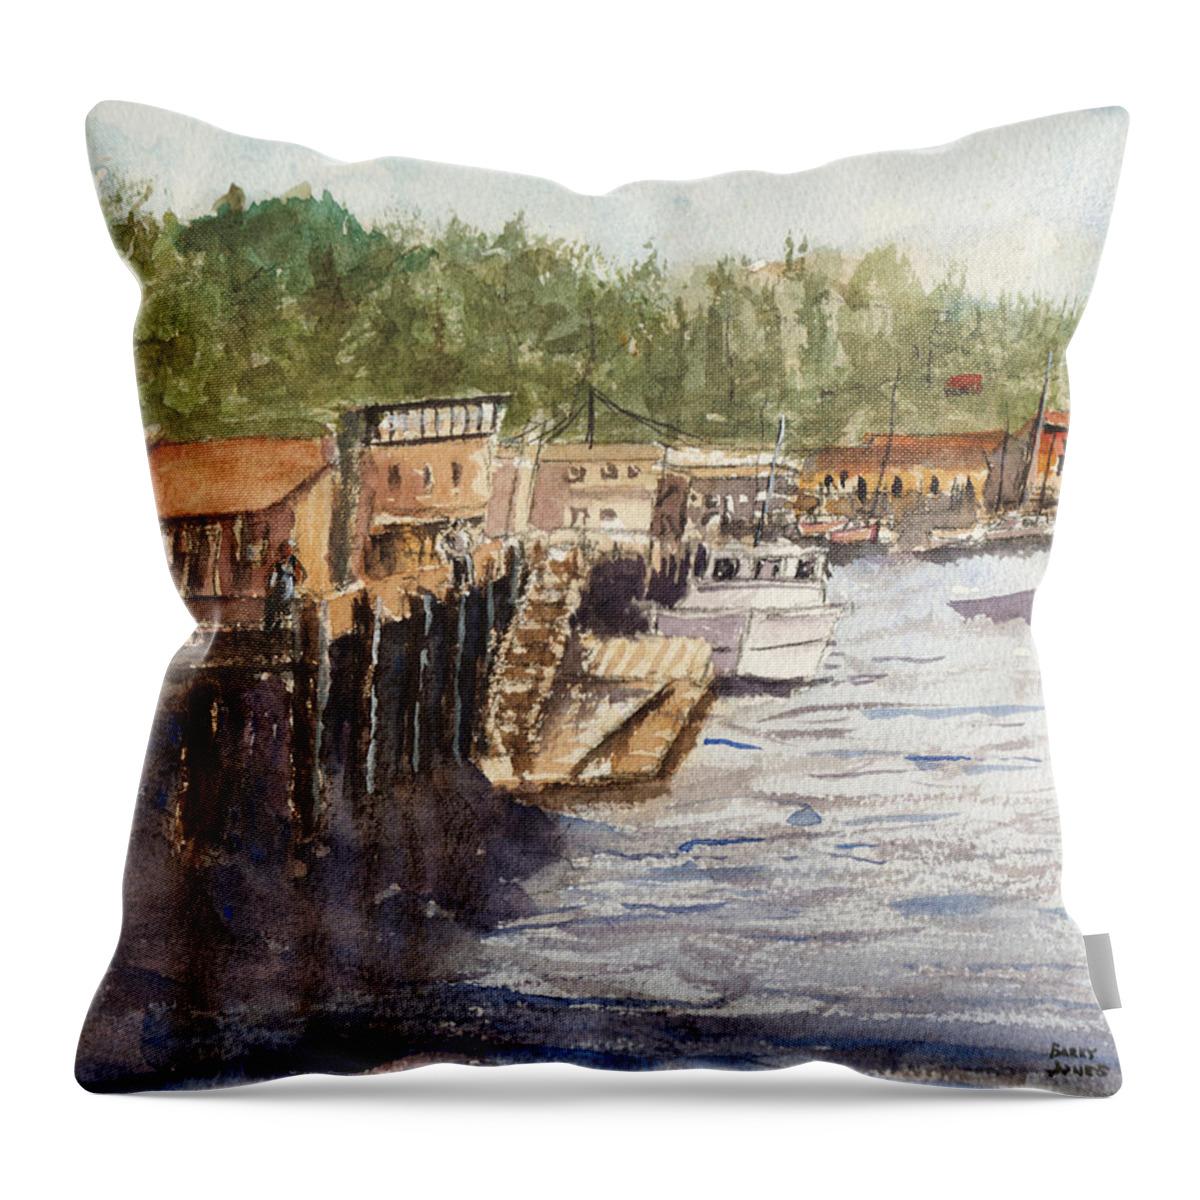 Harbor Town Throw Pillow featuring the painting Harbor Town by Barry Jones